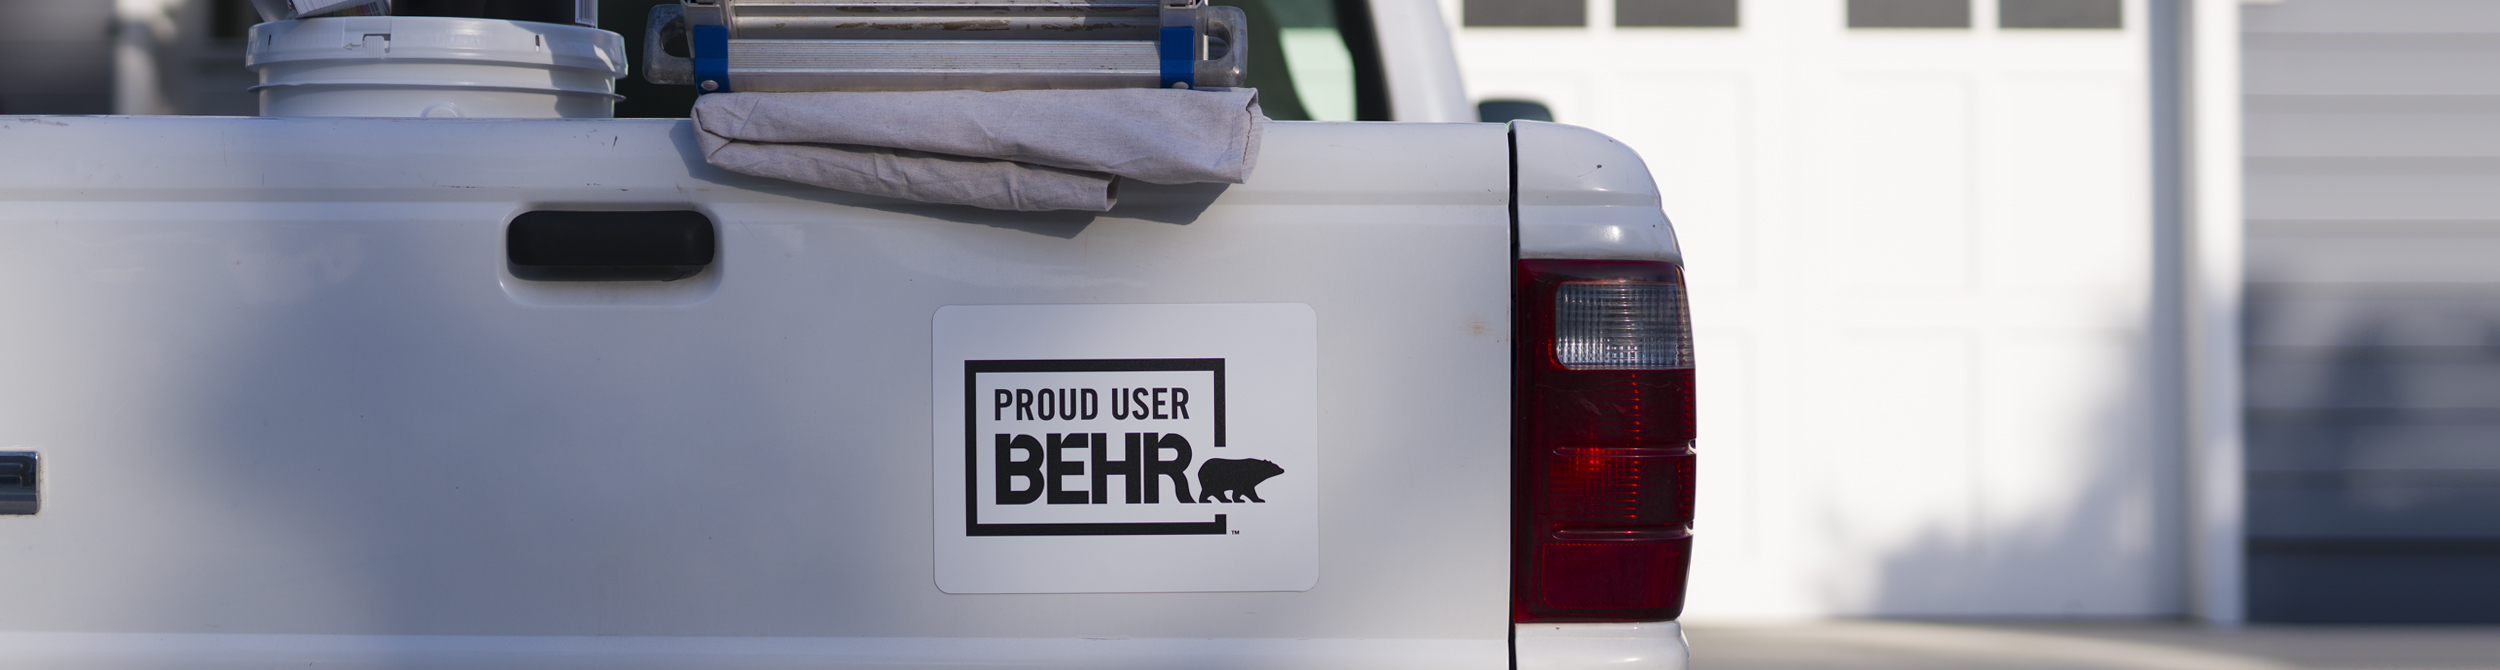 Desktop view of a pick up truck with a Behr sticker that says PROUD USER BEHR. On the back you can see a ladder, dropcloth, 1 gallon of BEHR PREMIUM PLUS Exterior Paint.